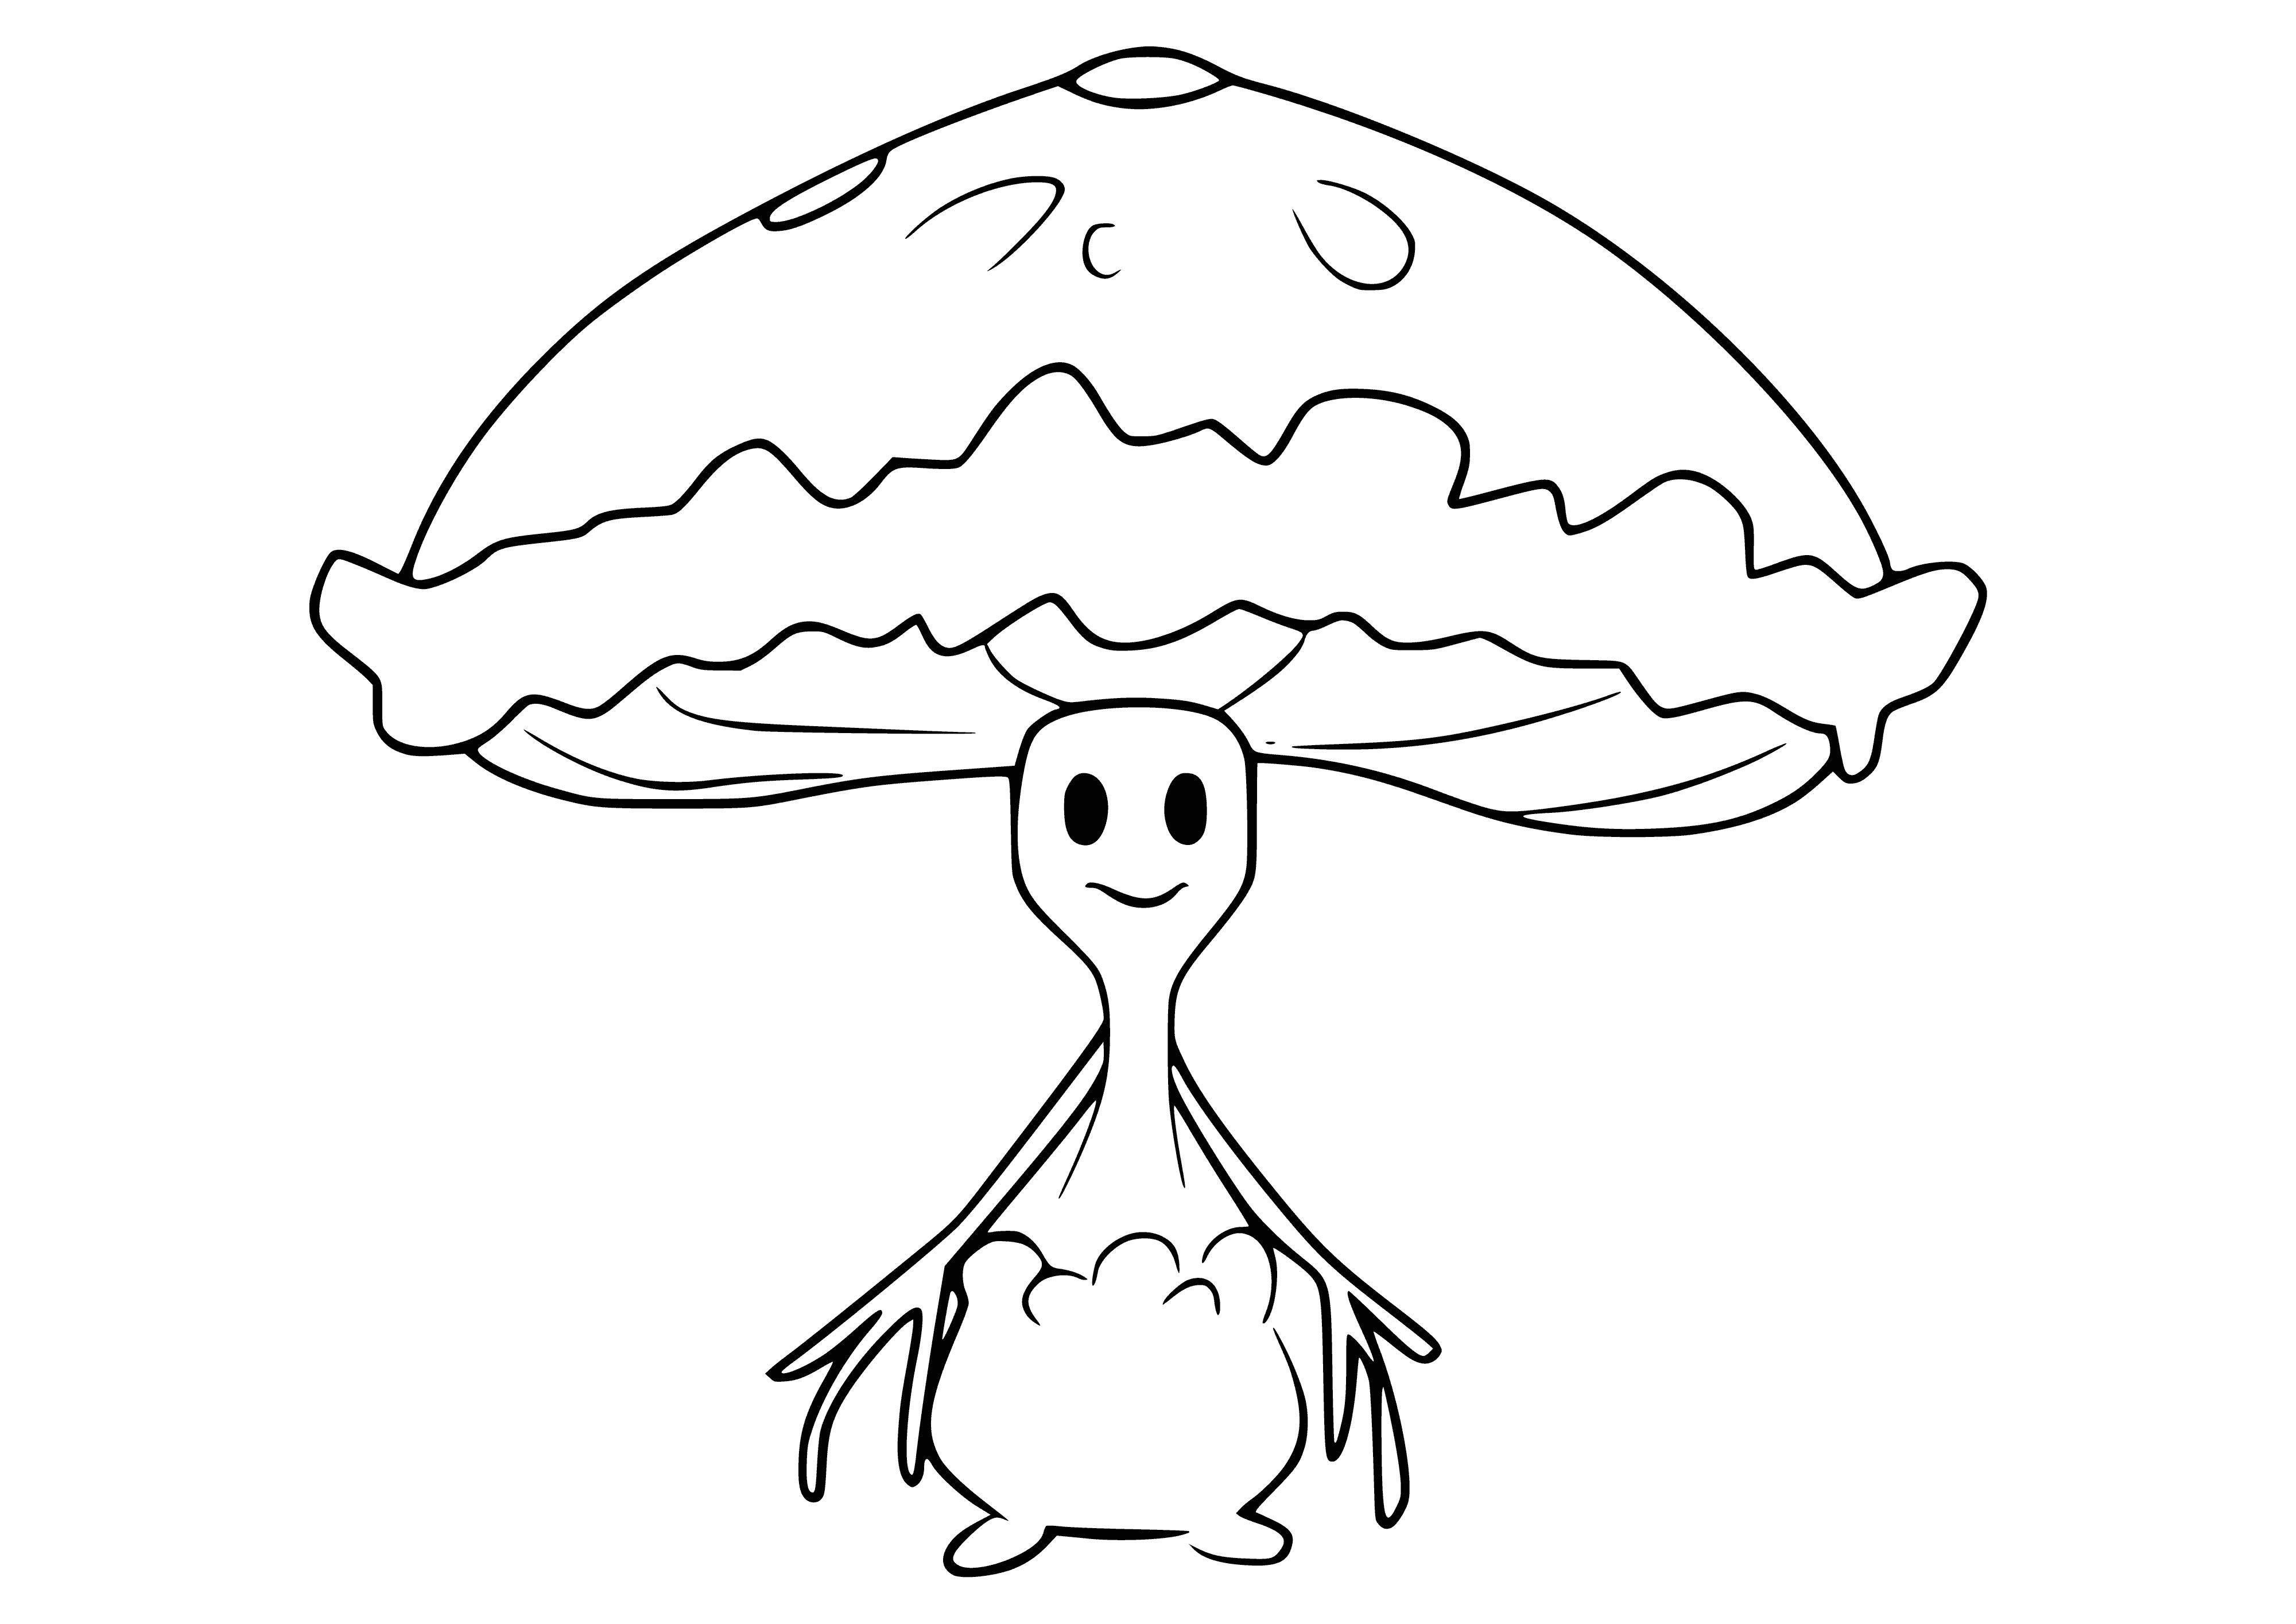 coloring page: Shiinotic is a mushroom-like Pokemon with pale purple, black, and white spotted features, four arms, and a ruff of spores around its neck.